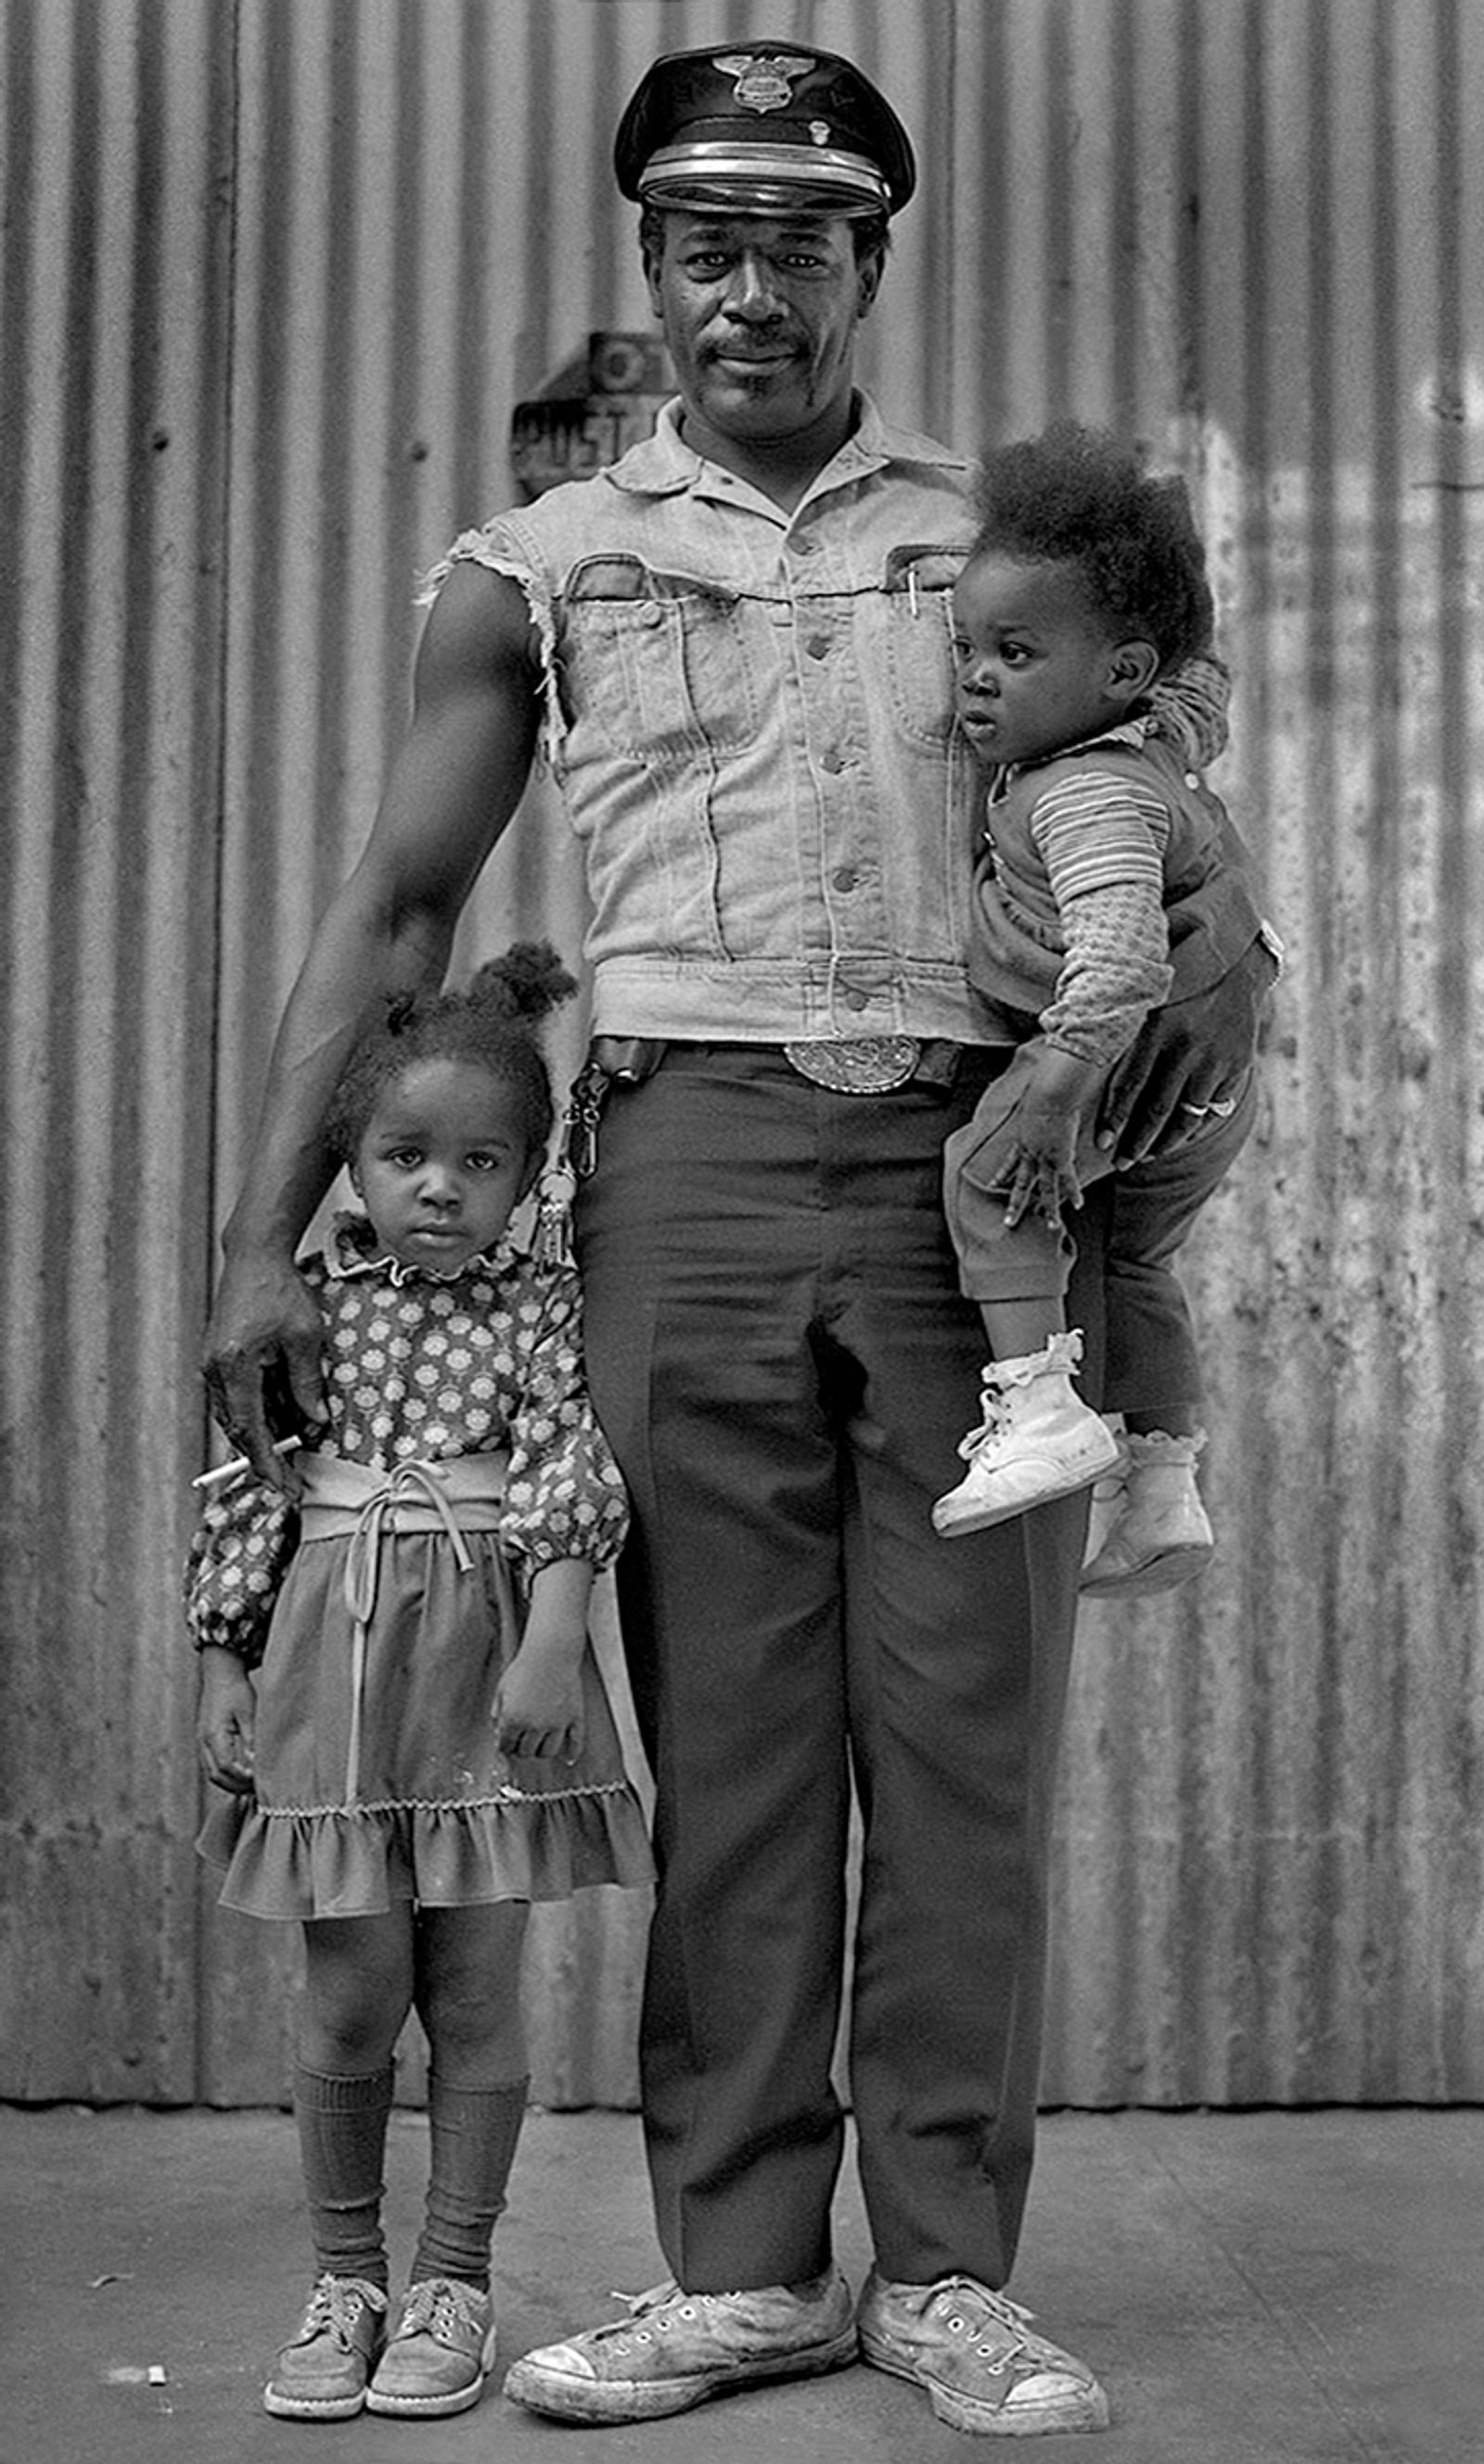 © Steven Edson - Father and children. NYC, NY